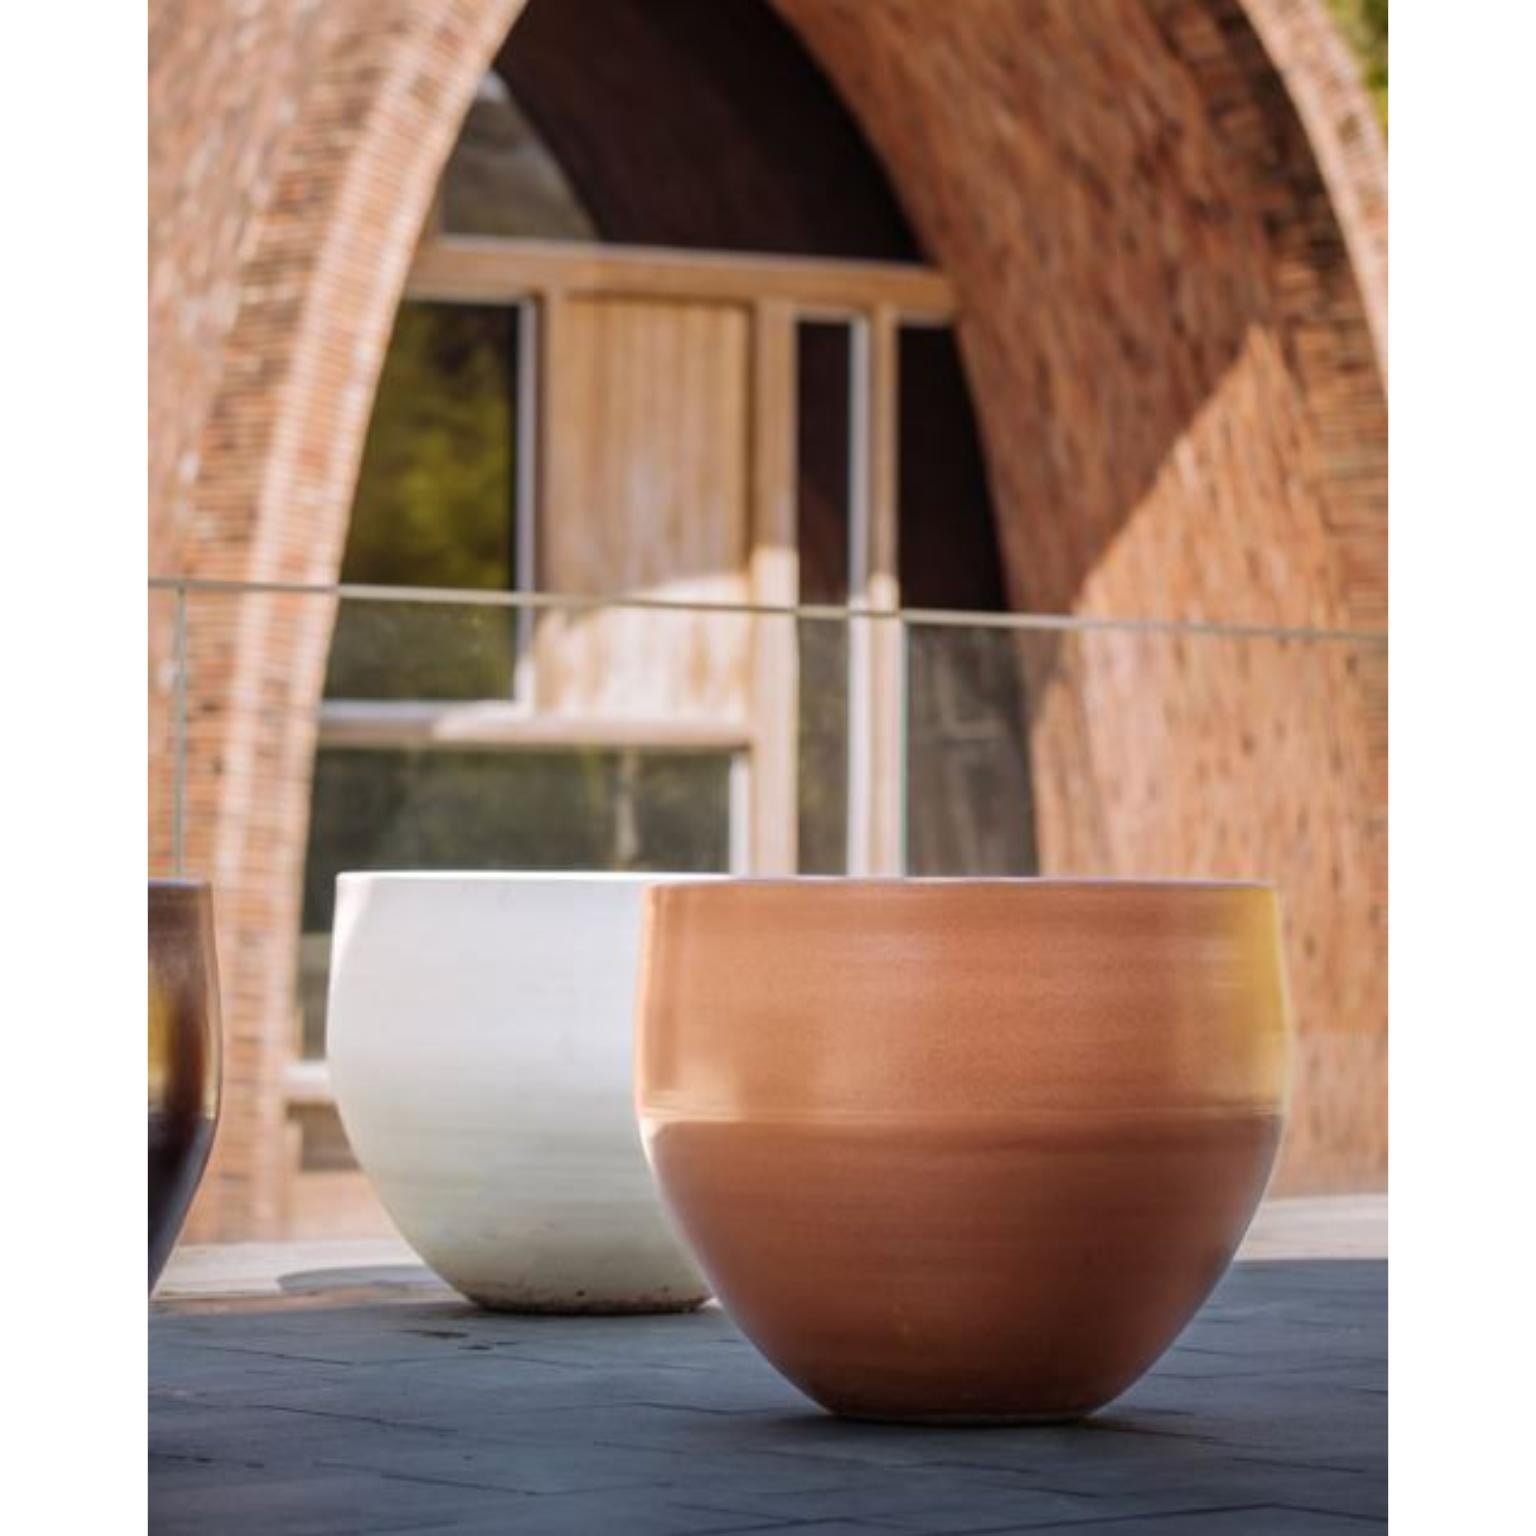 Elements Planters S by WL Ceramics
Designer: WL Ceramics
Materials: Porcelain
Dimensions: H60 x Ø70 cm

With their minimal yet elegant forms, the ELEMENTS PLANTERS are designed as a canvas for the many beautiful glazes that we have in our